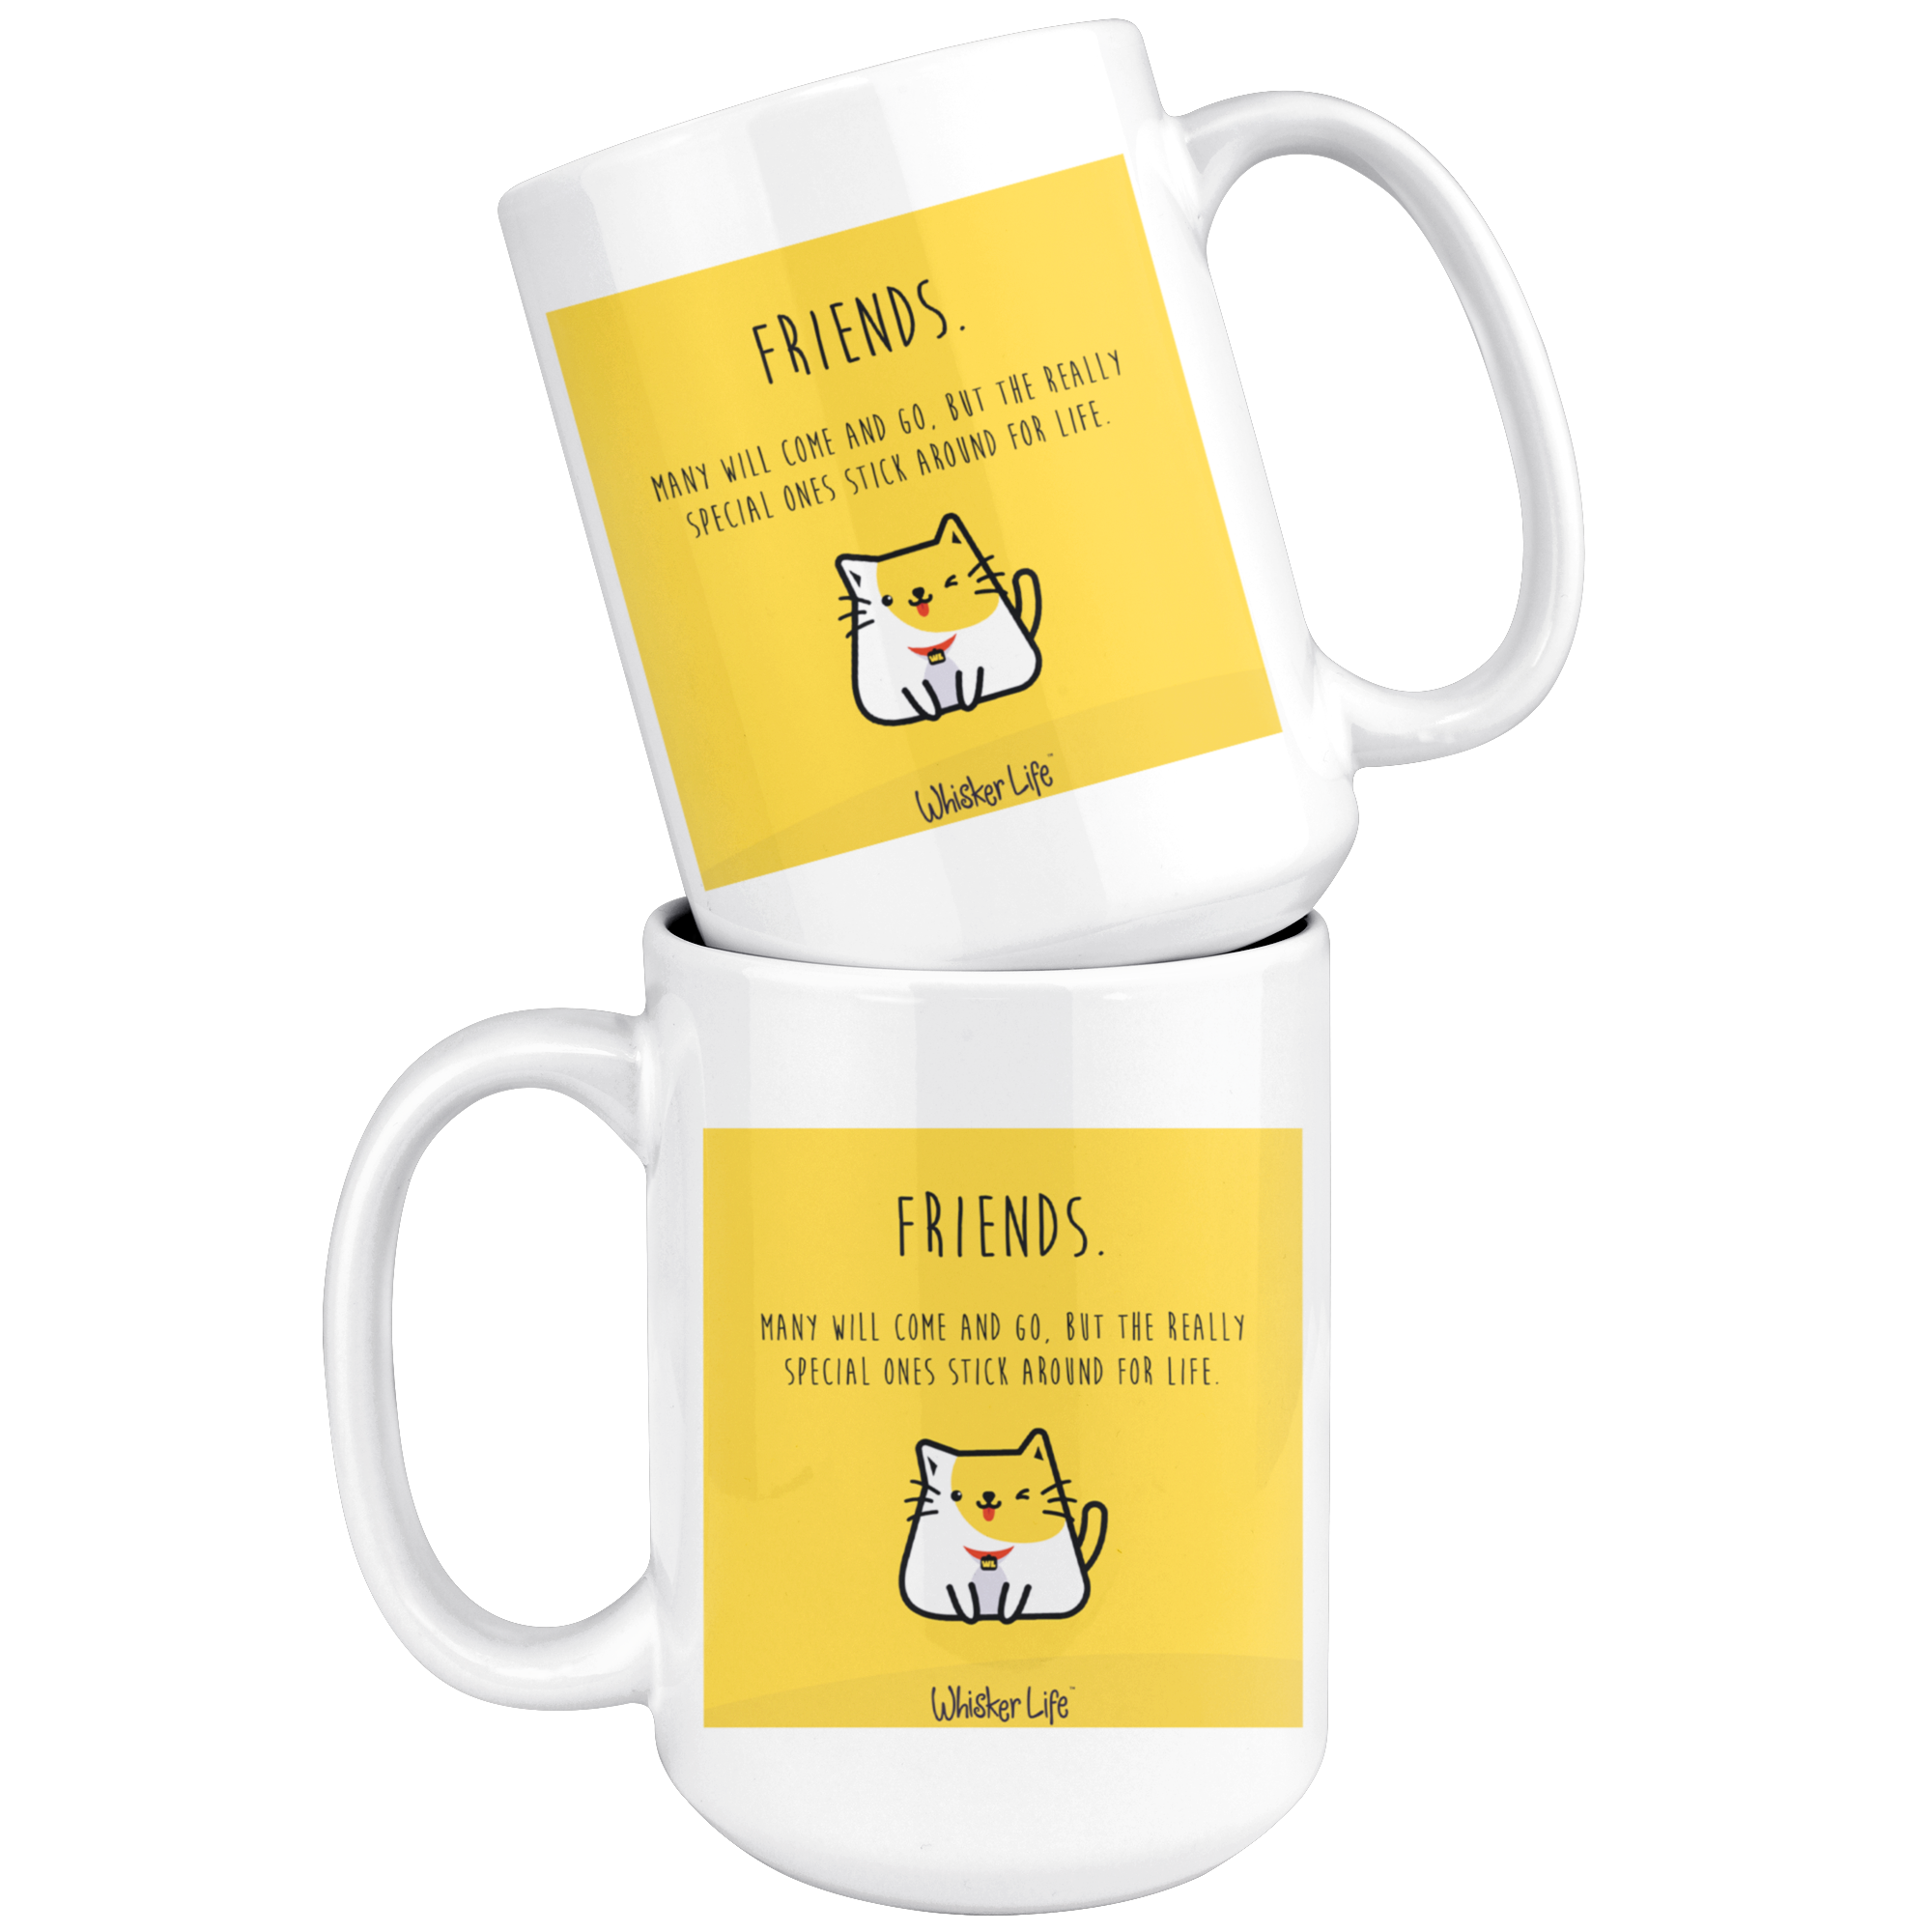 Friends Come and Go - Whisker Life - Large 15 oz Coffee Mug